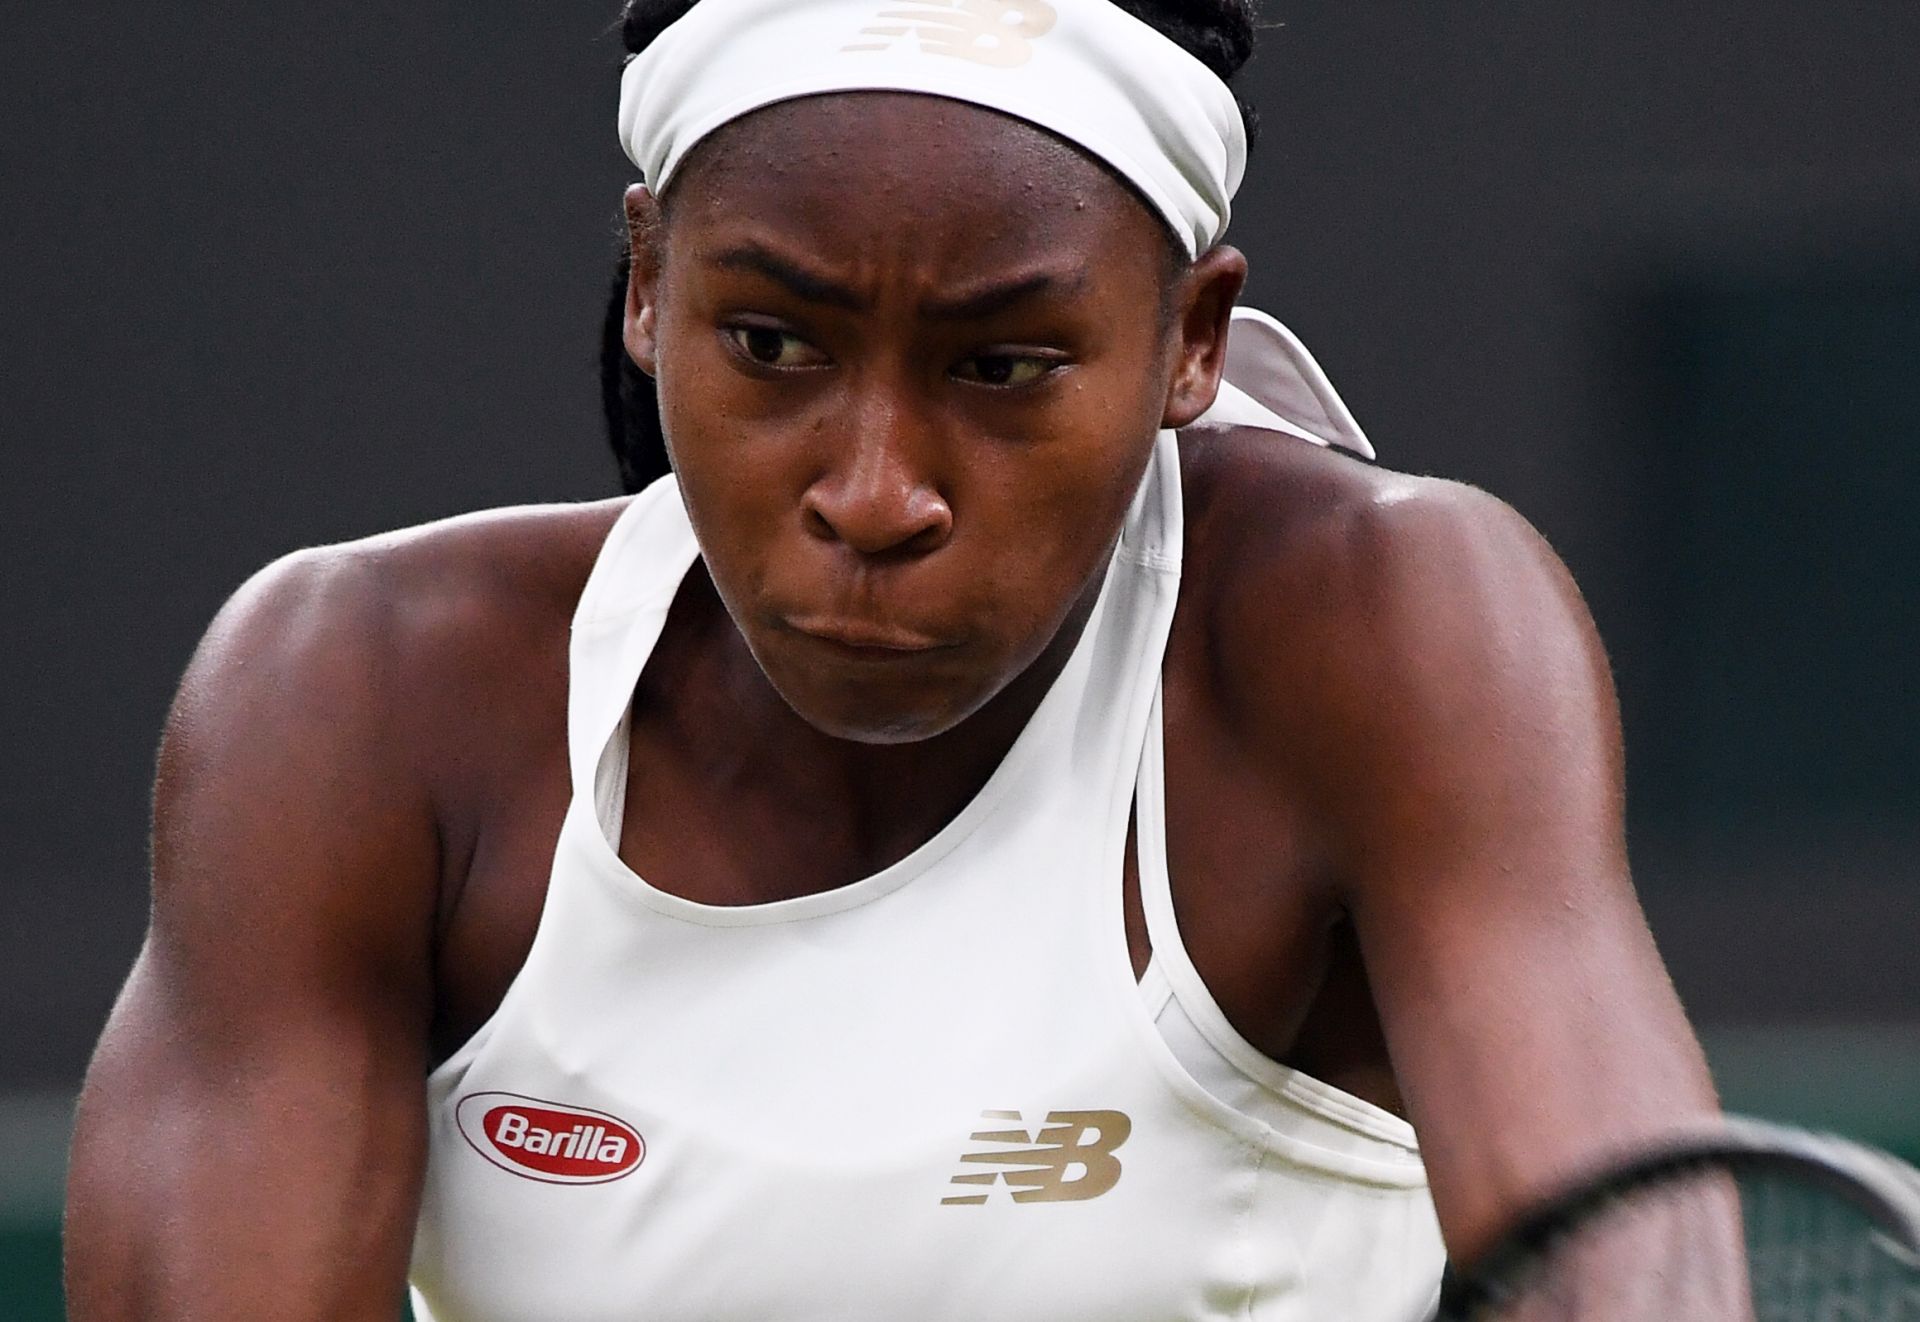 epa07693090 Cori Gauff of the US returns to Magdalena Rybarikova of Slovakia in their second round match during the Wimbledon Championships at the All England Lawn Tennis Club, in London, Britain, 03 July 2019. EPA/ANDY RAIN EDITORIAL USE ONLY/NO COMMERCIAL SALES